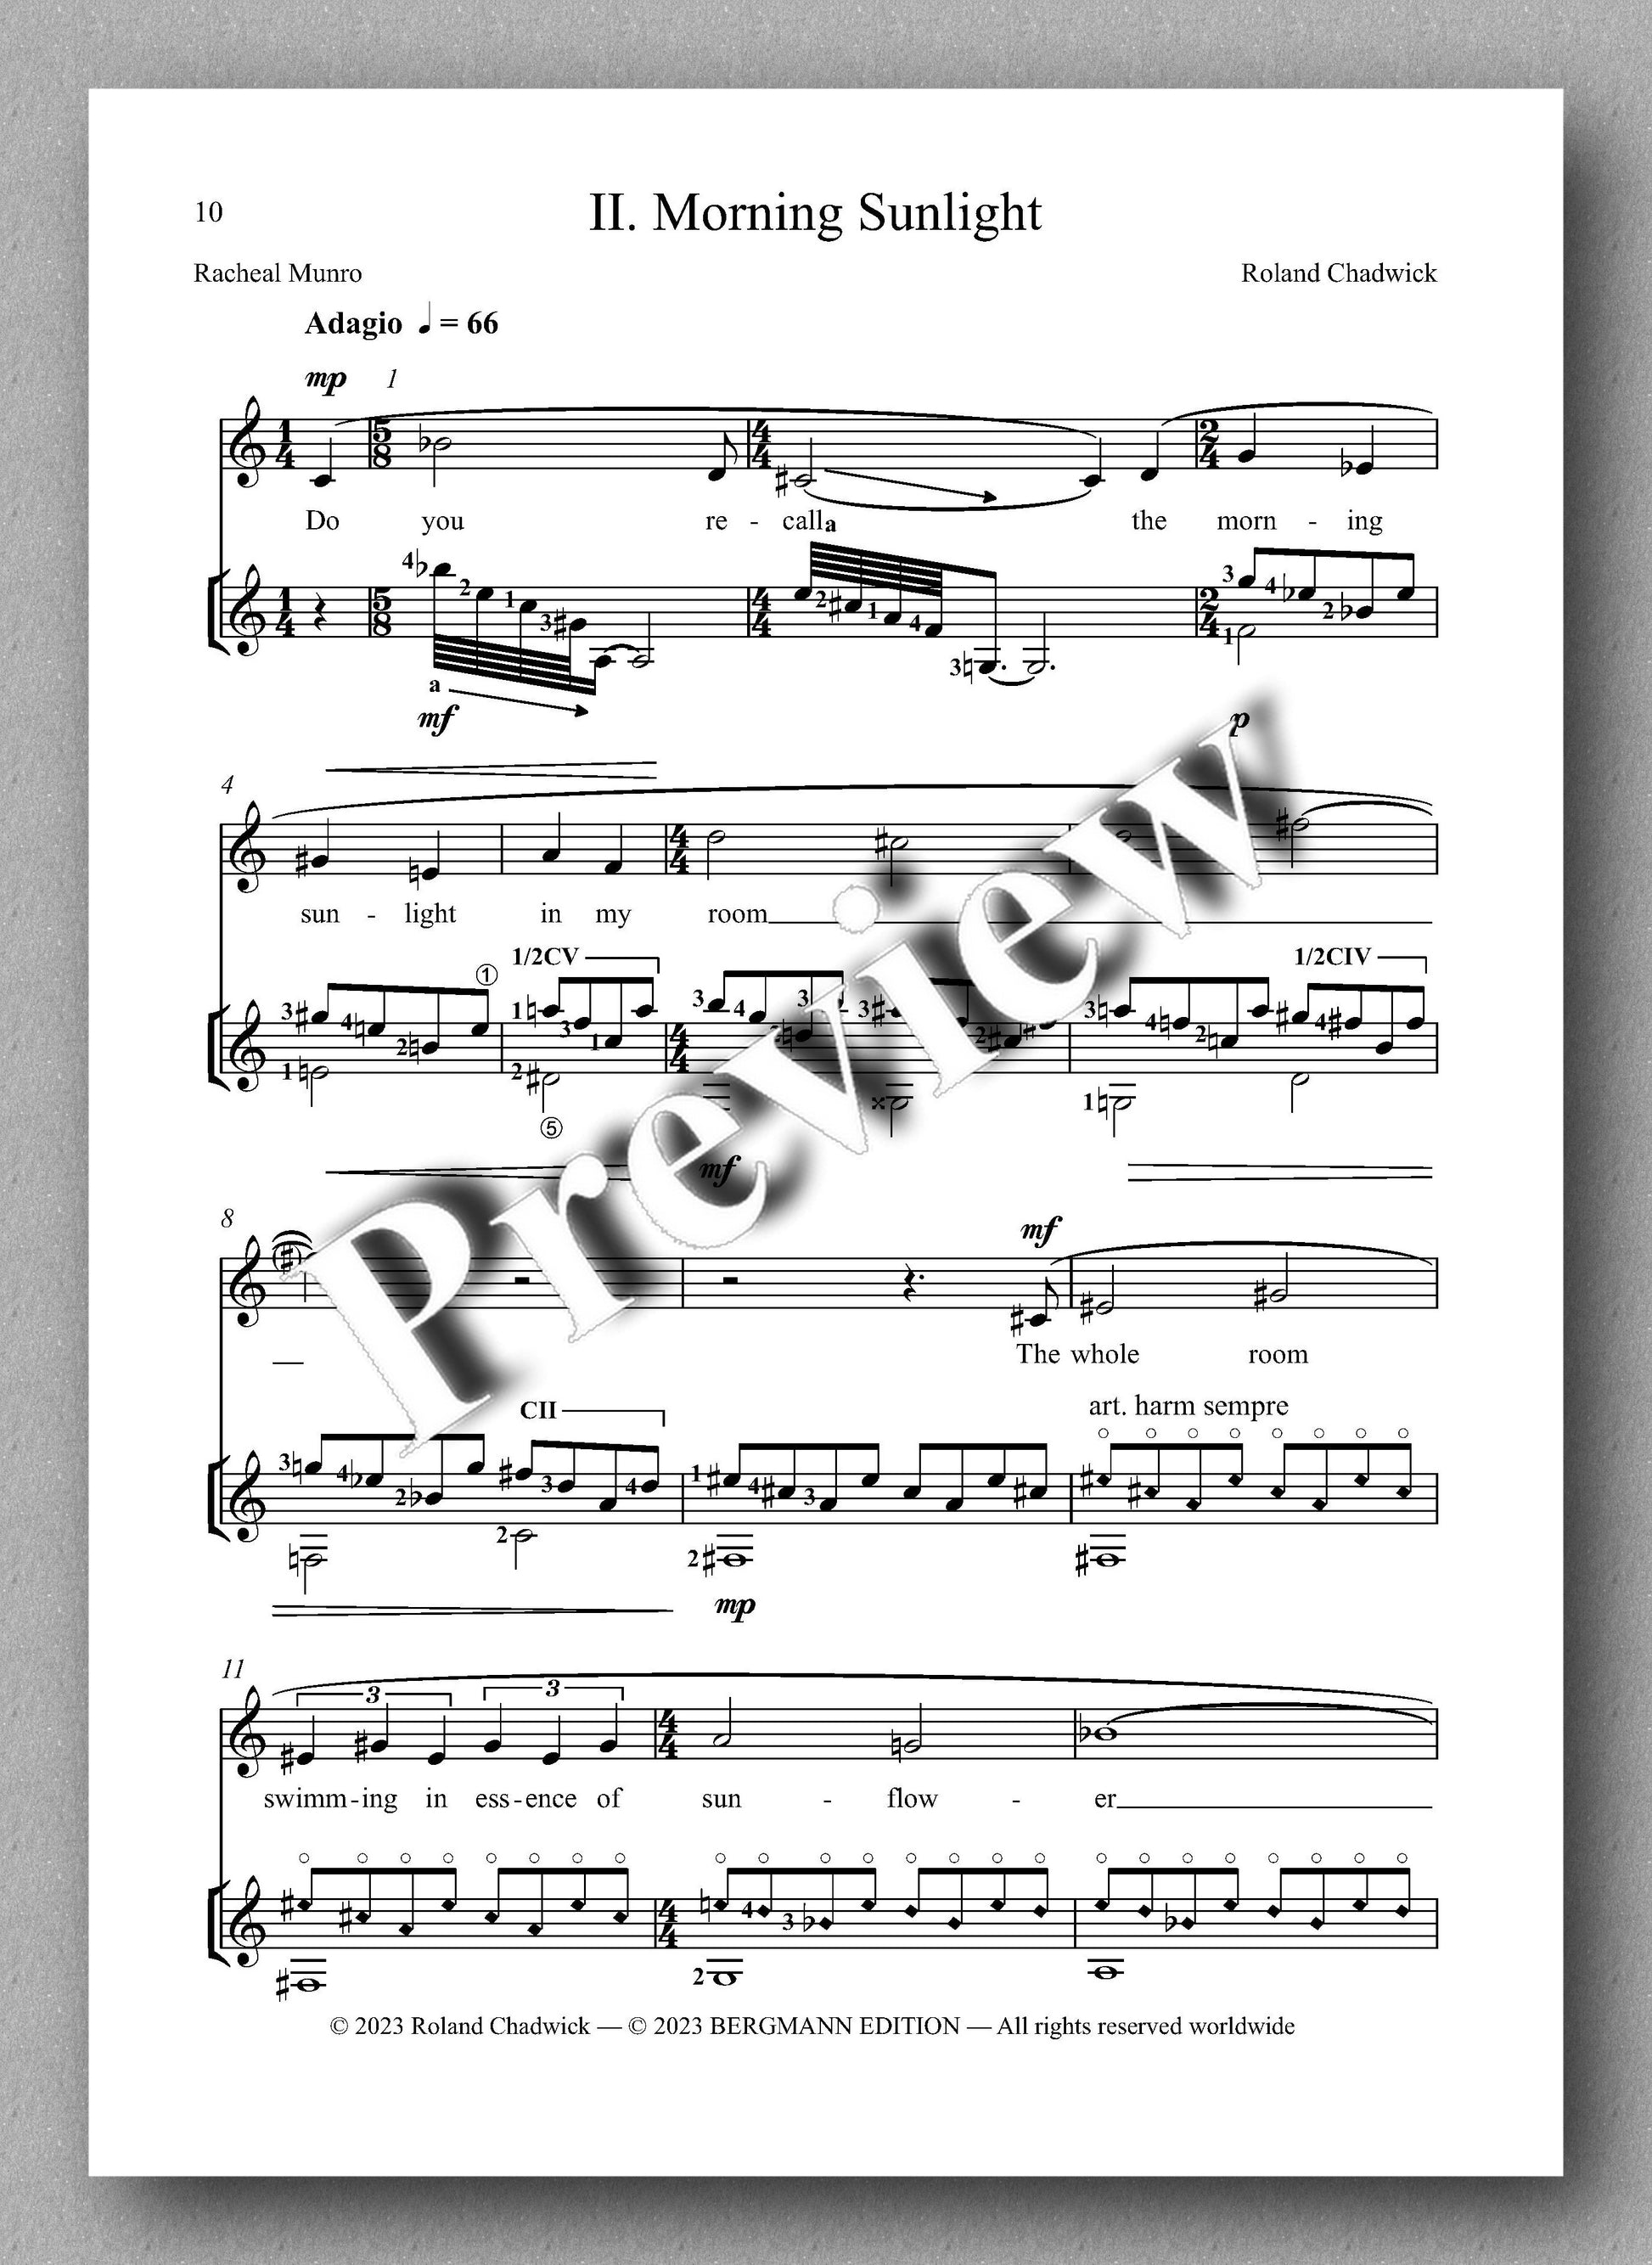 Roland Chadwick, Like Honey Thickly Golden - preview of the music score 2